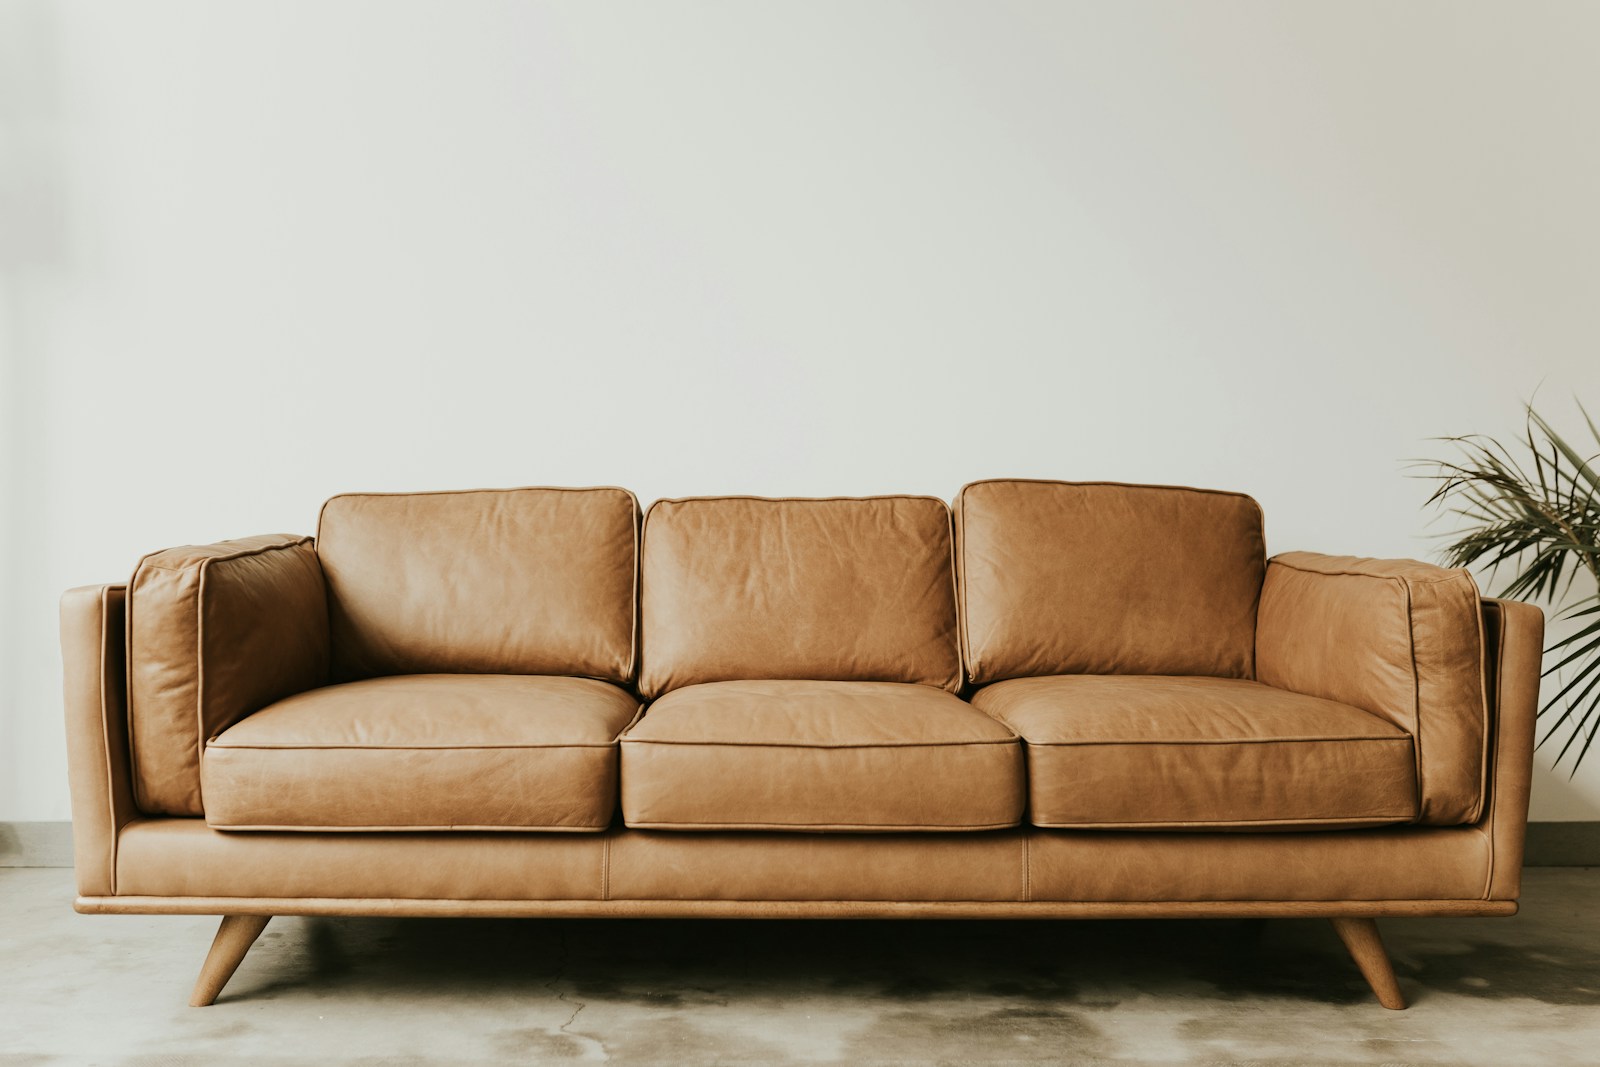 Types of Sofas and How to Choose the Best for Your Space